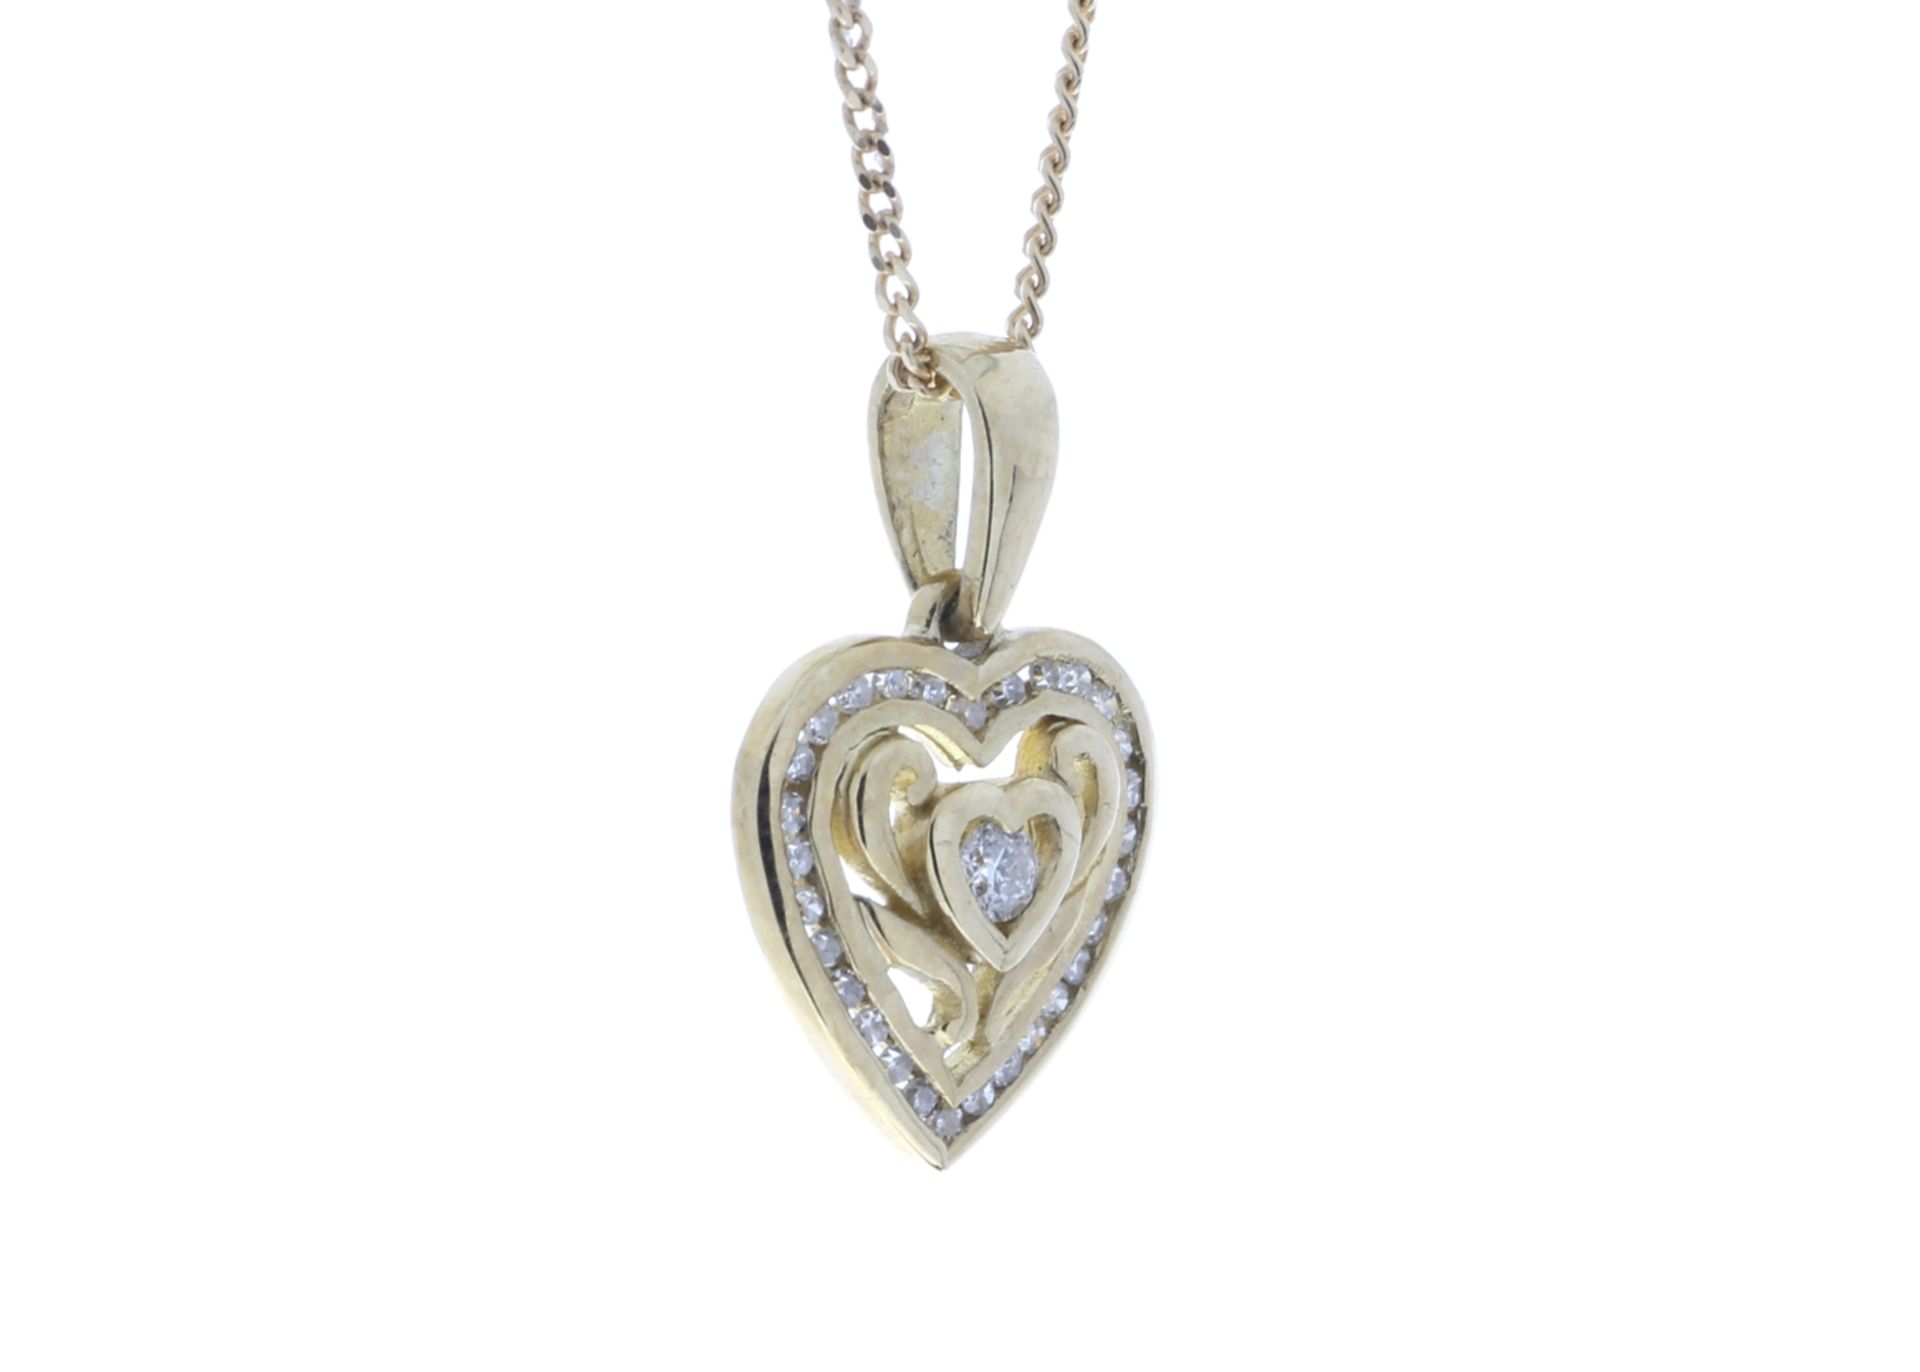 9ct Yellow Gold Heart Pendant Set With Diamonds With Centre Heart and Swirls 0.18 Carats - Image 2 of 5